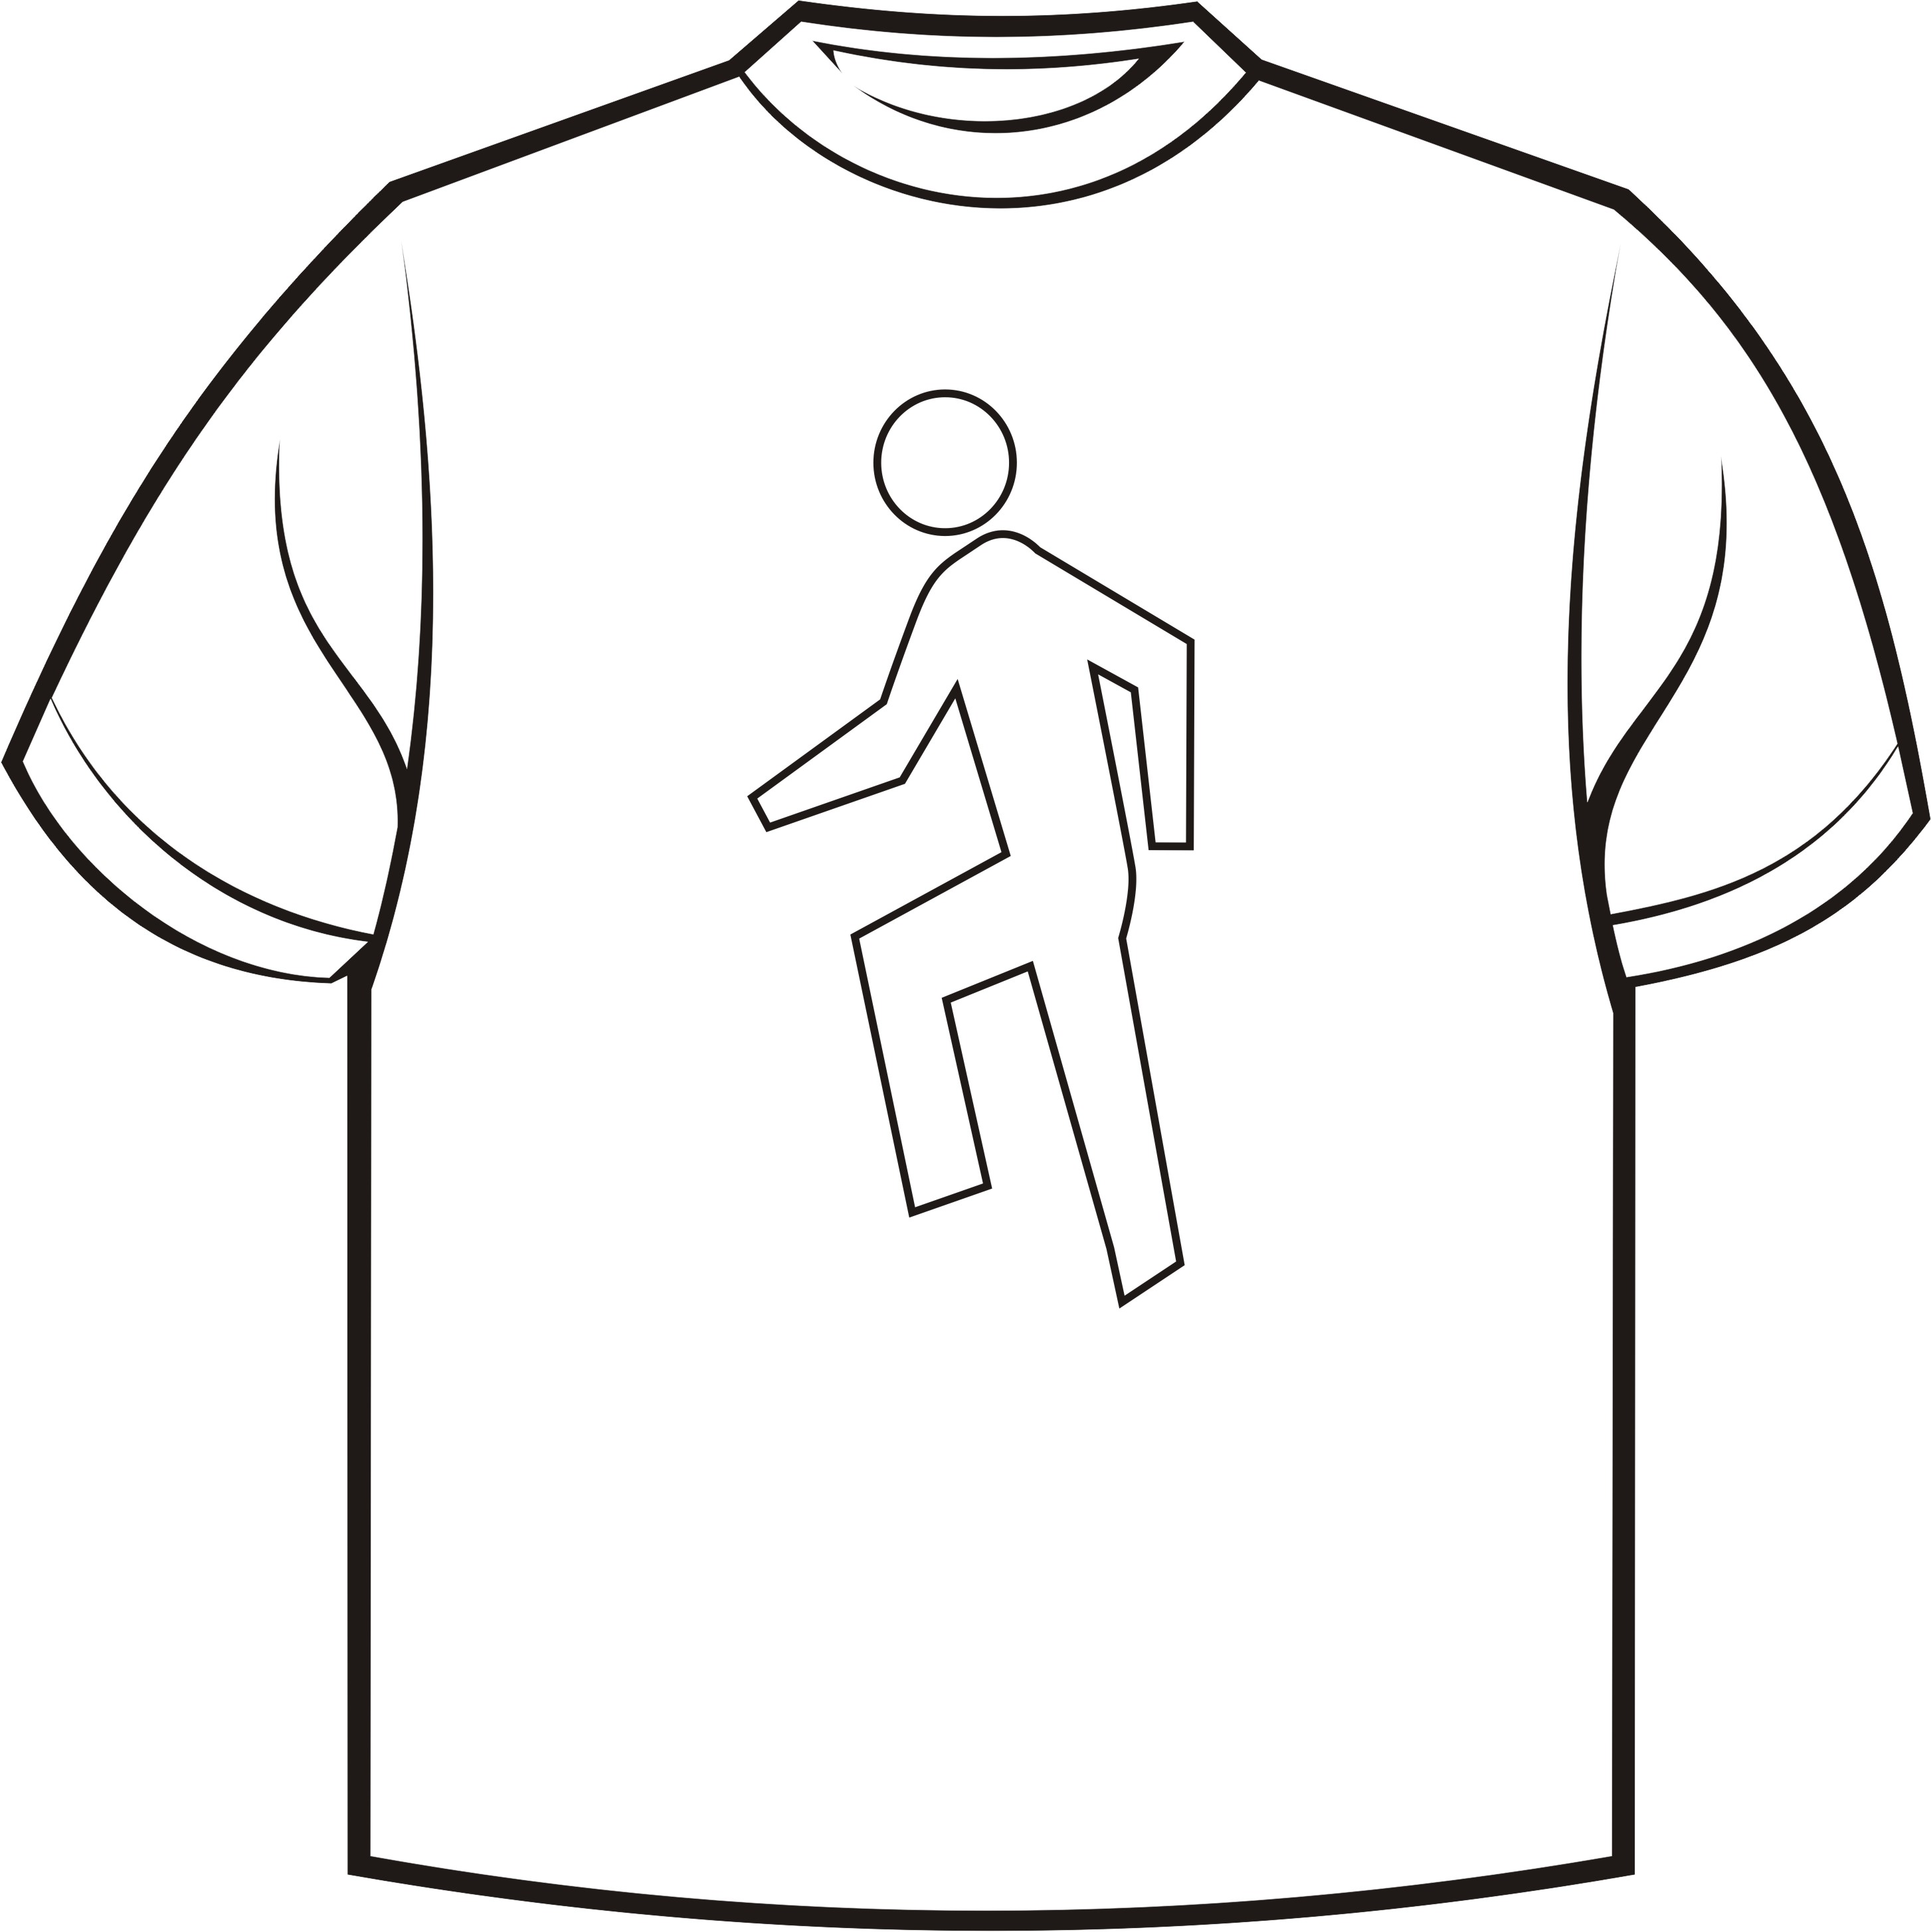 T-shirts Drawing - ClipArt Best